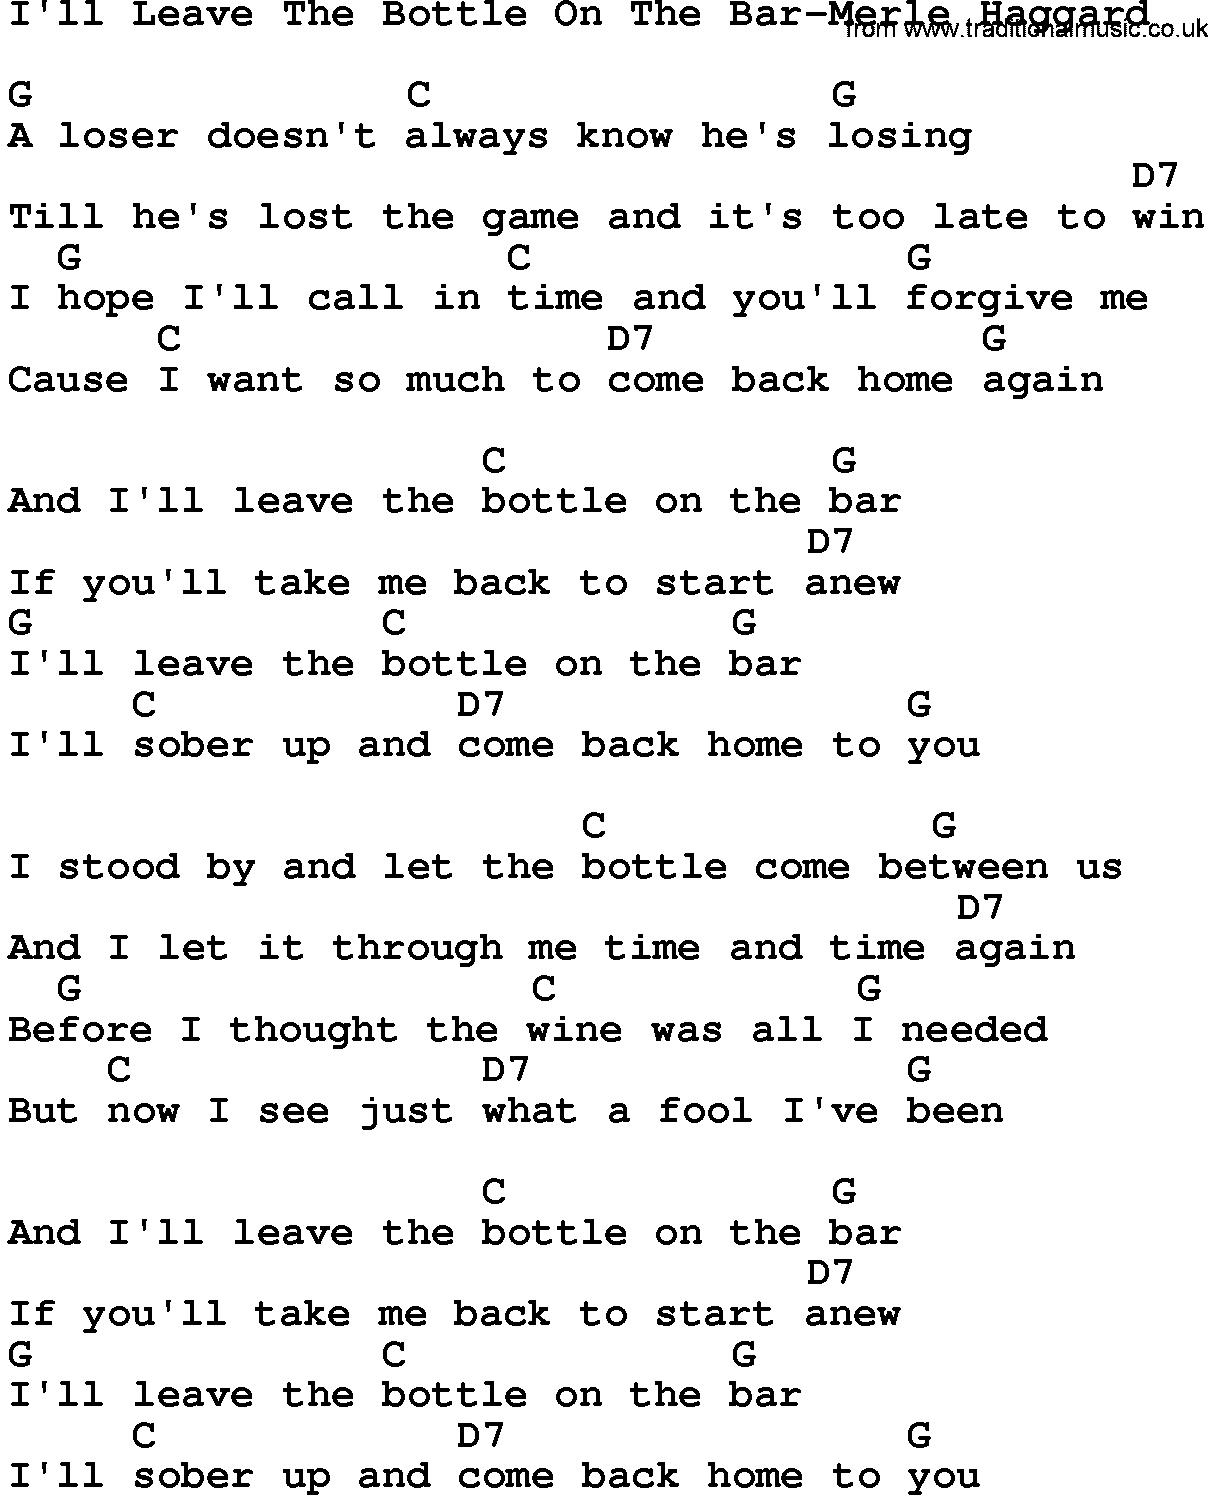 Country music song: I'll Leave The Bottle On The Bar-Merle Haggard lyrics and chords